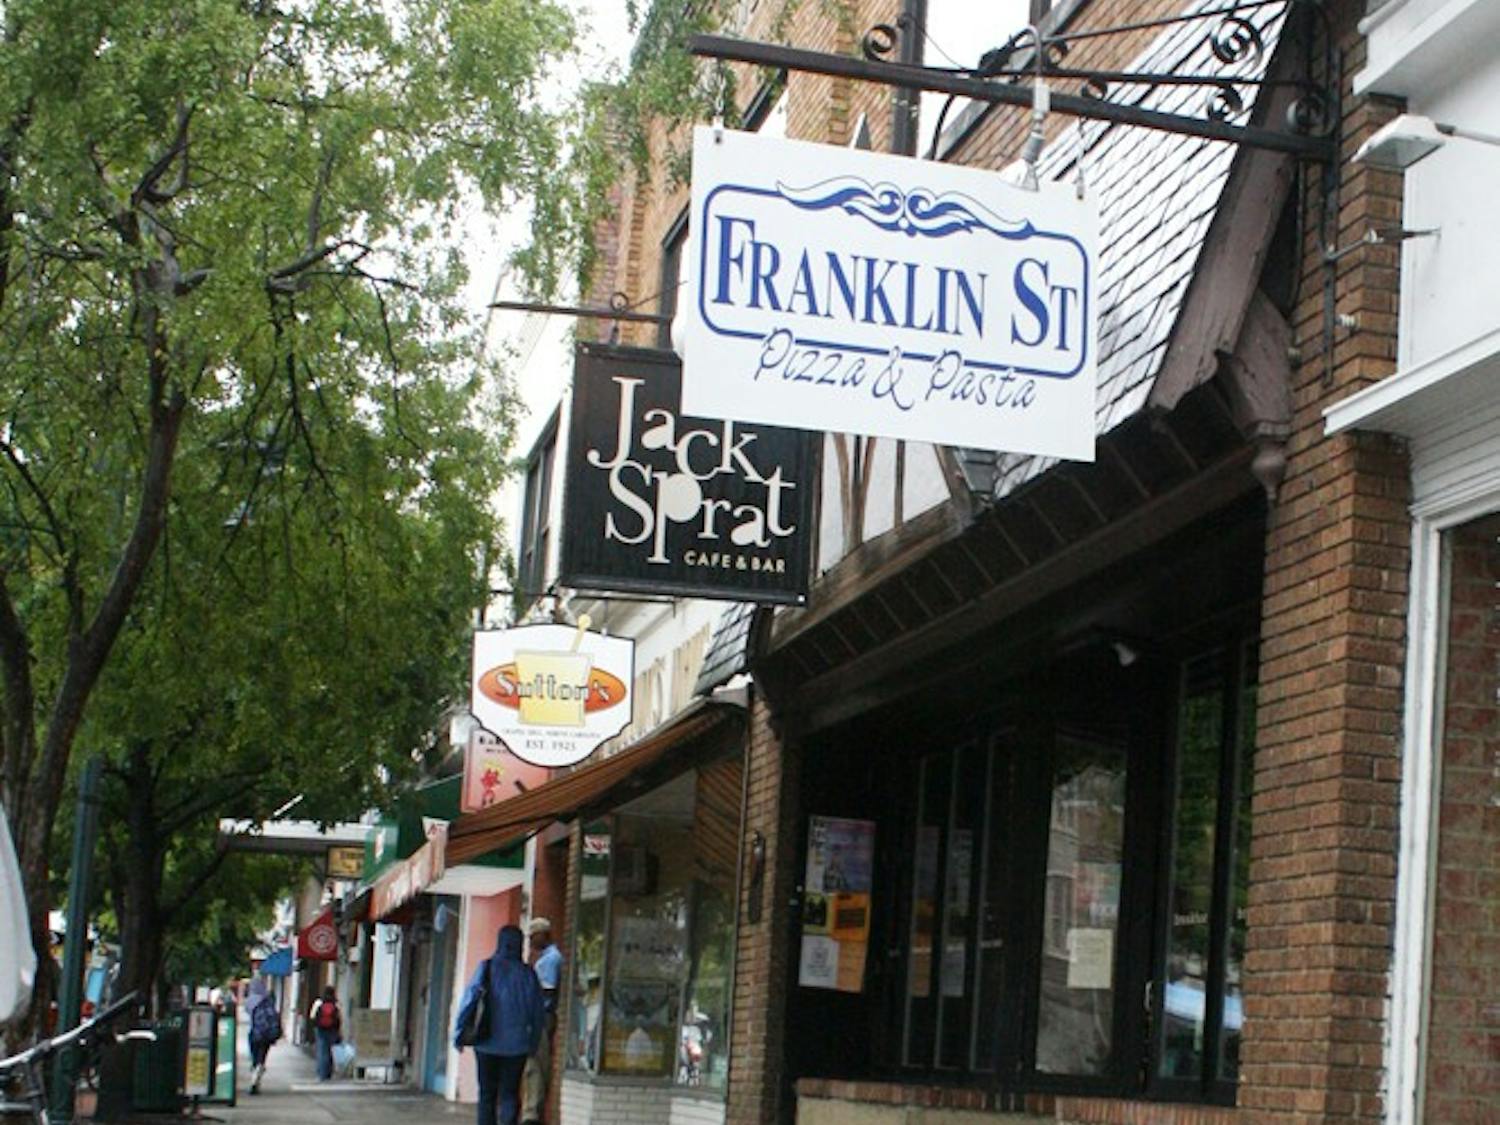 Franklin Street businesses, despite the economic downturn and high rent costs, are still maintaining growth and bringing in customers.